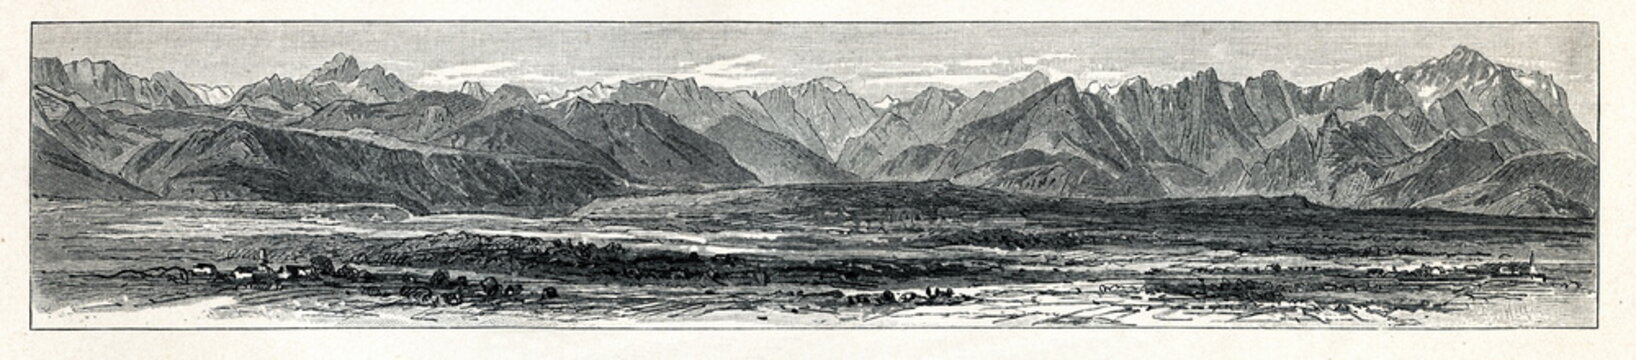 Chain mountains - Karwendel and  Wetterstein in the Northern Limestone Alps (from Meyers Lexikon, 1895, 7 vol.)